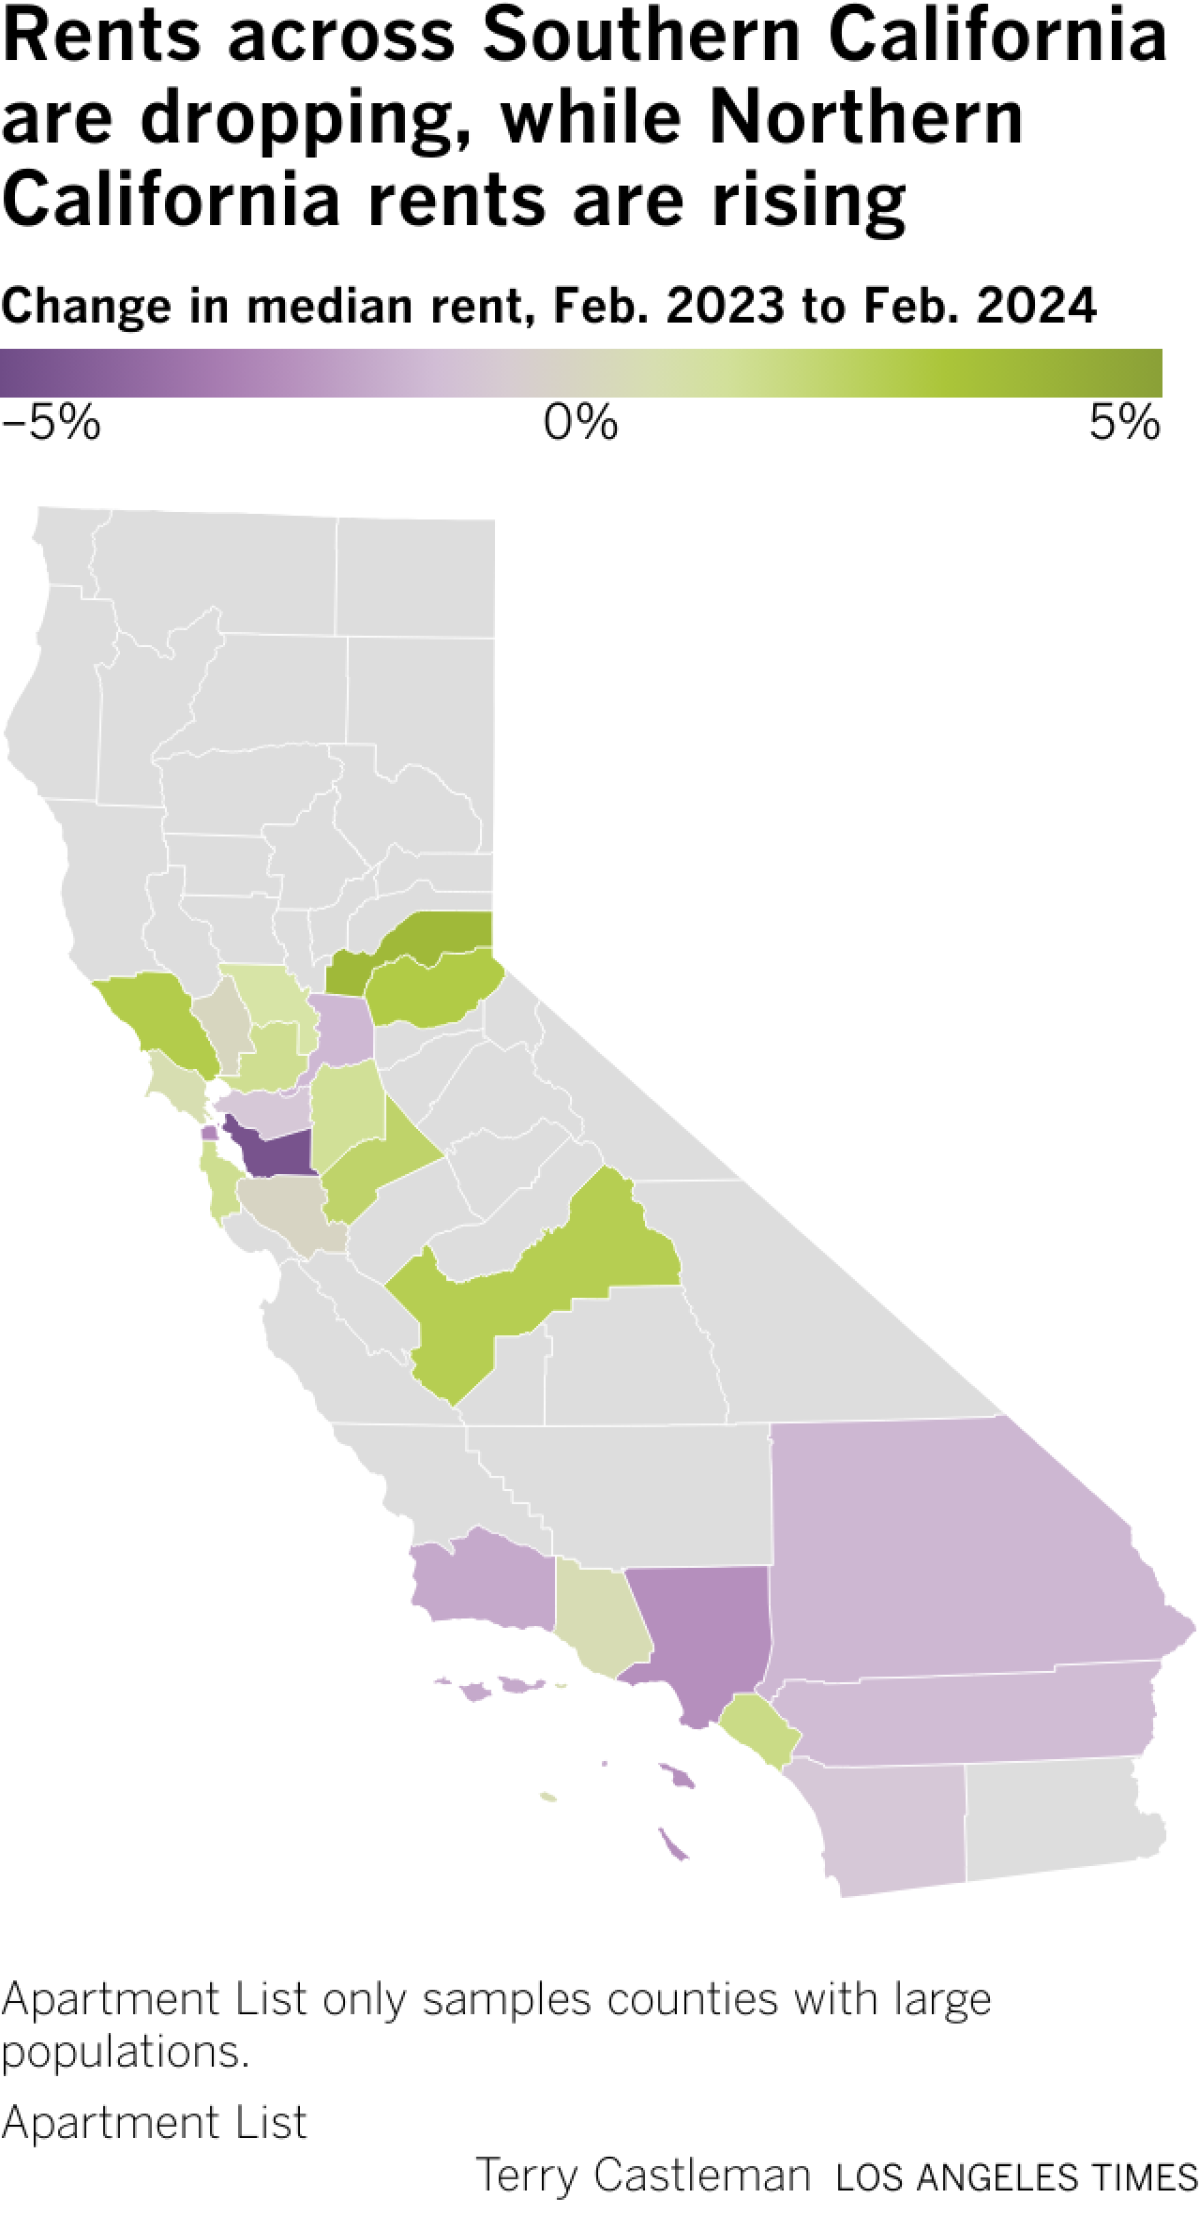 Map shows rising rents in most Northern California counties and falling rents in most Southern California counties.